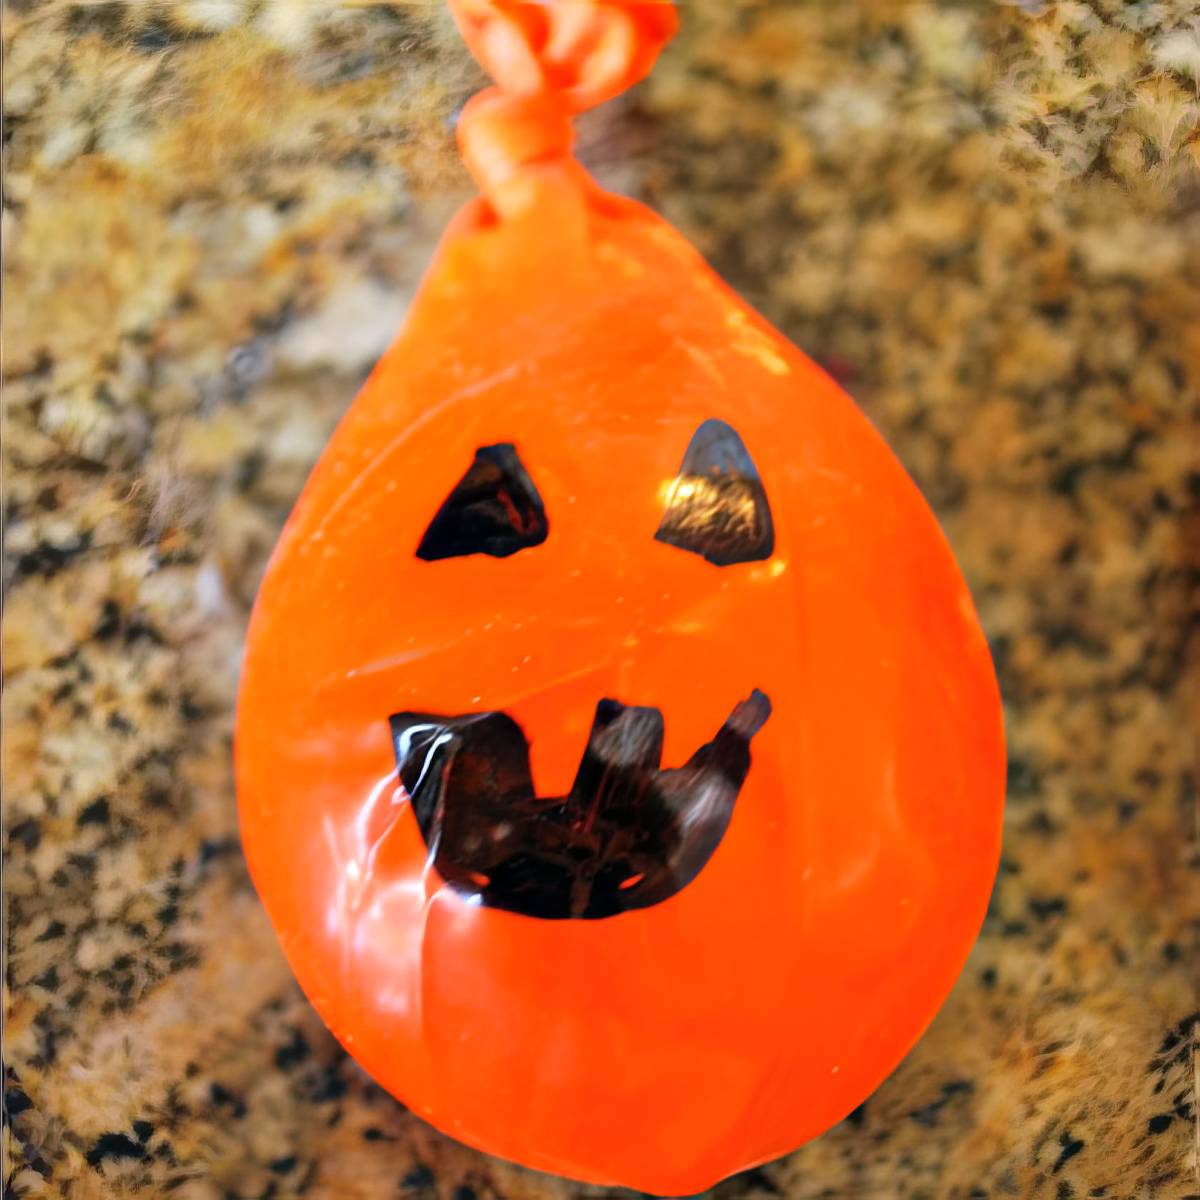 orange inflated balloon with a ghost face used for a toss game as halloween activities for 4 year olds